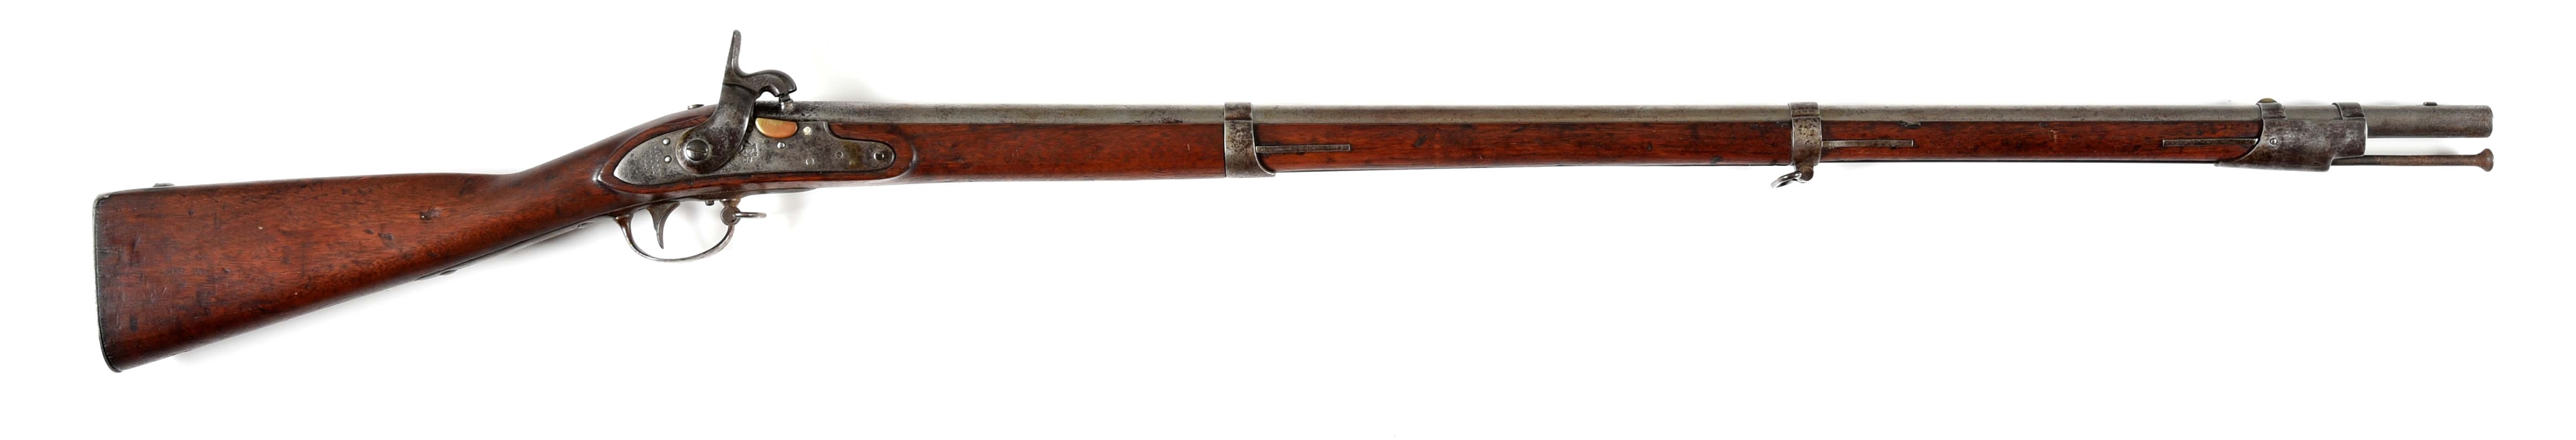 (A) HARPERS FERRY MODEL 1816 PERCUSSION CONVERTED MUSKET.